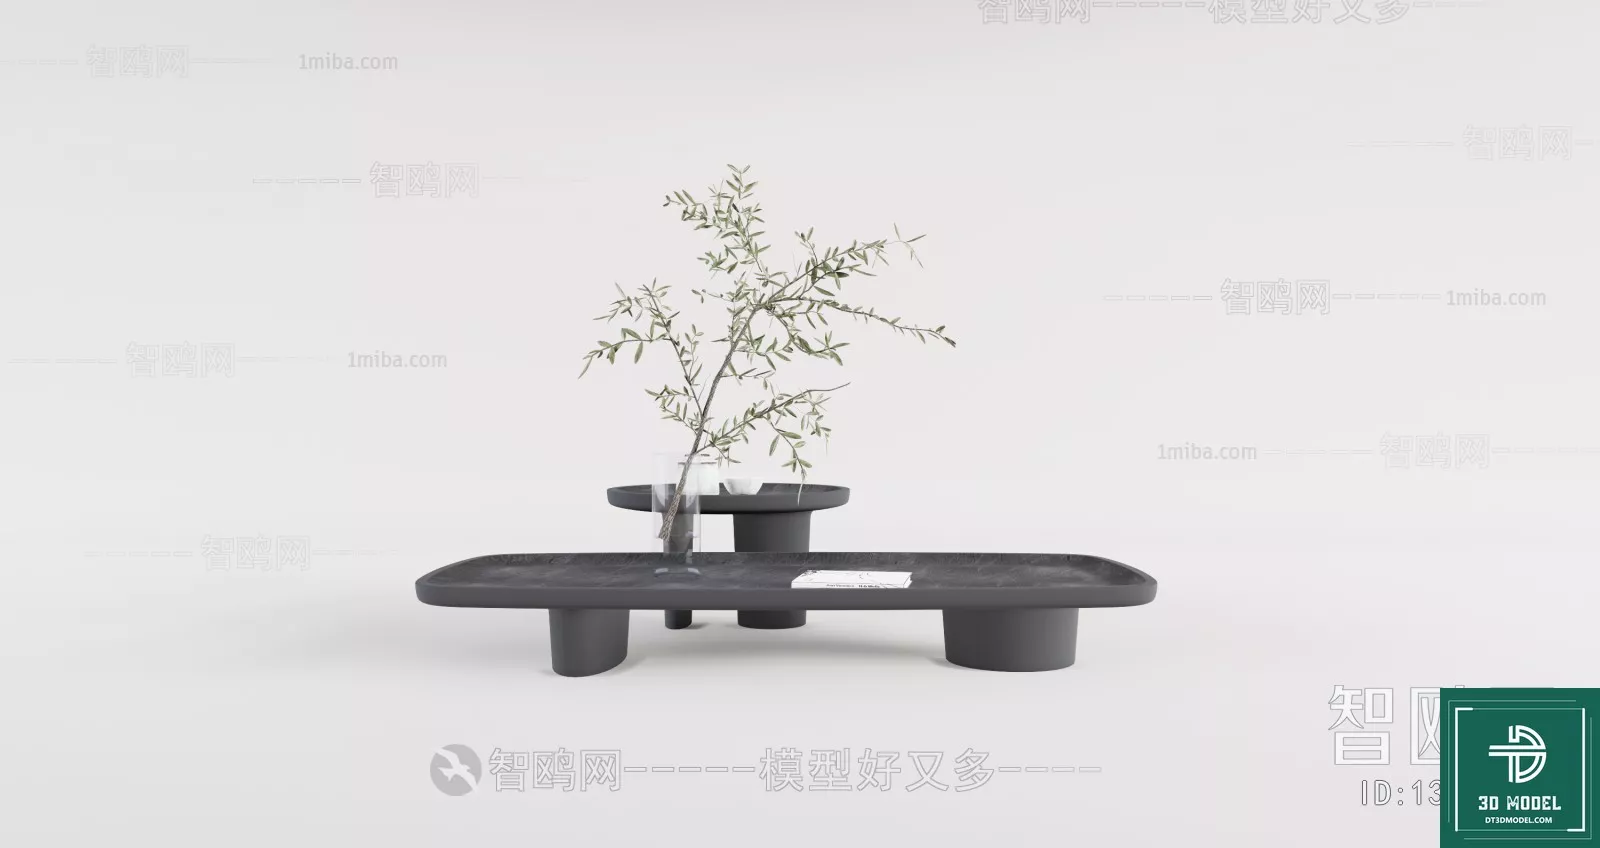 MODERN TEA TABLE - SKETCHUP 3D MODEL - VRAY OR ENSCAPE - ID14958